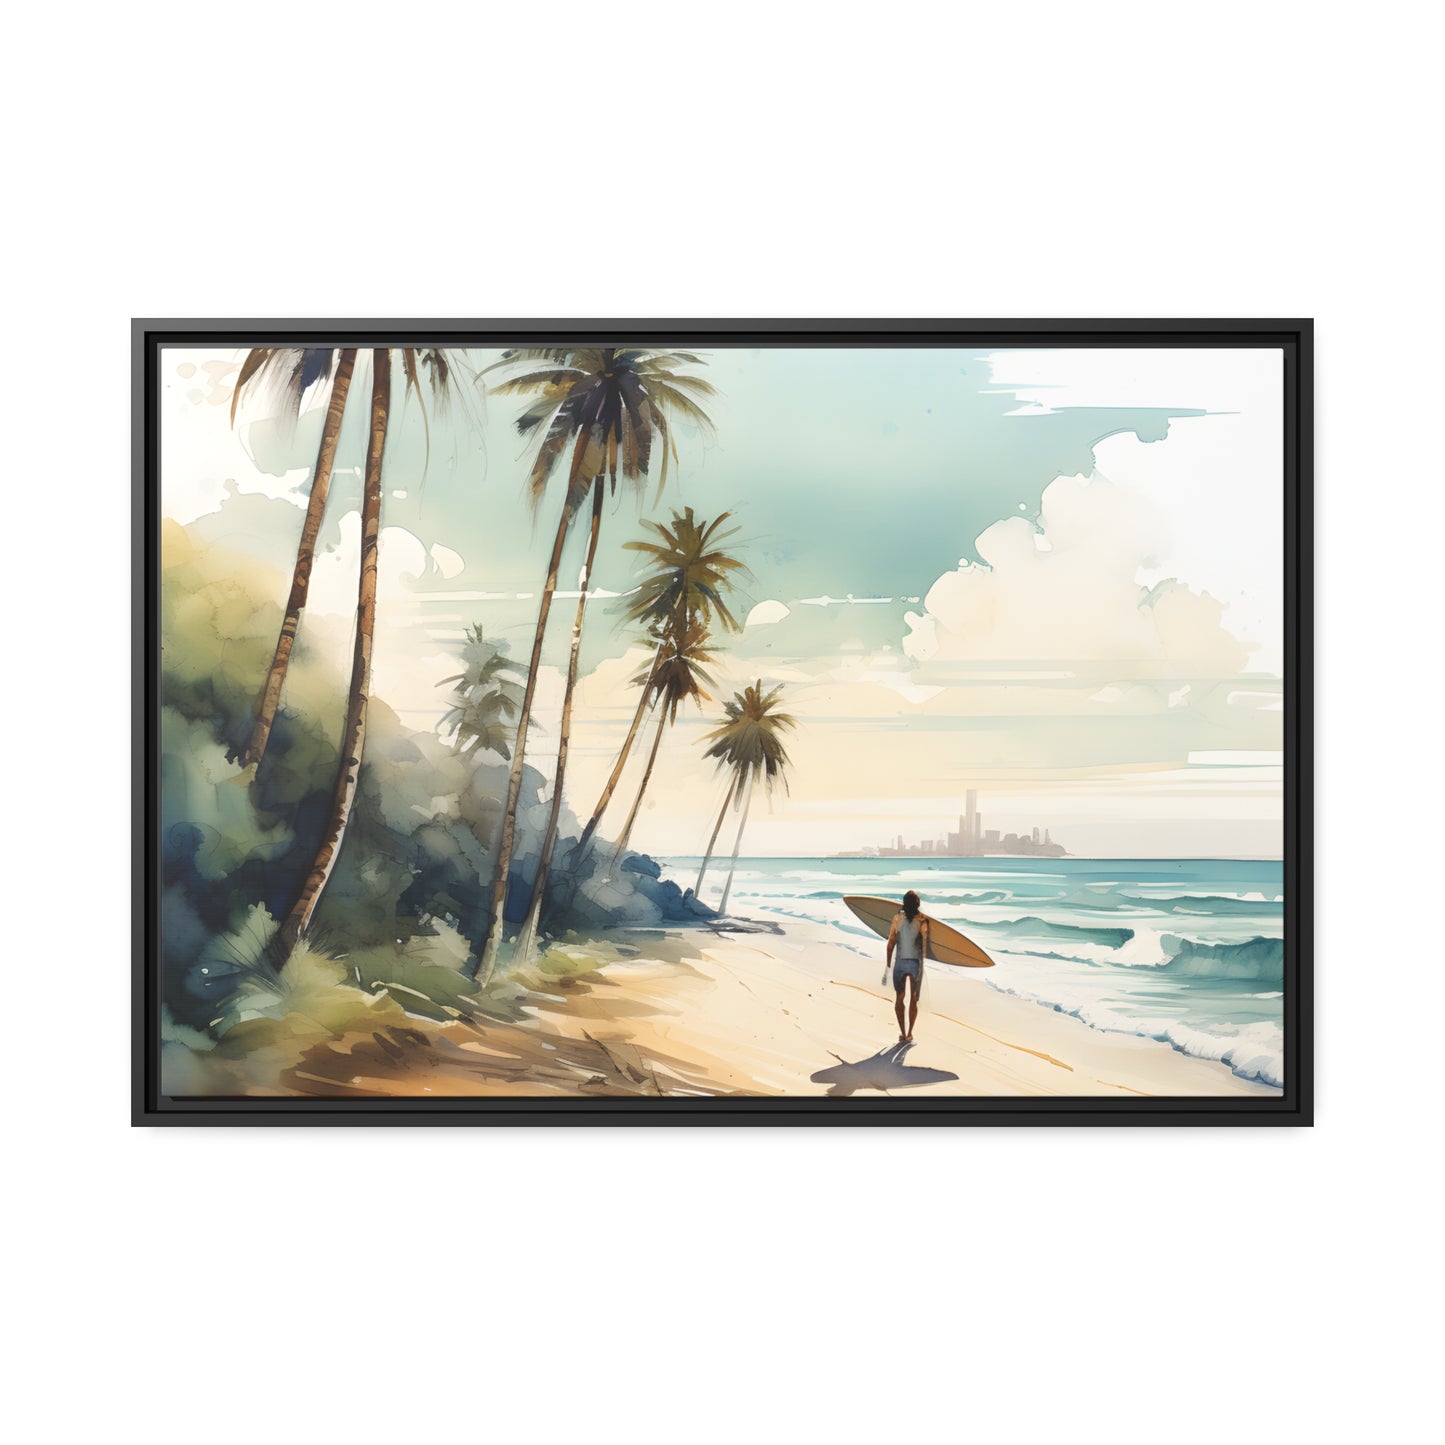 Framed Canvas Artwork Beach Ocean Surfing Art Surfer On Beach Holding Surfboard And Palm Tree Silhouettes Water Color Style City In The Distant Background Hindered By Sea Mist Impressive Beach Scene Floating Frame Canvas Artwork Lifestyle